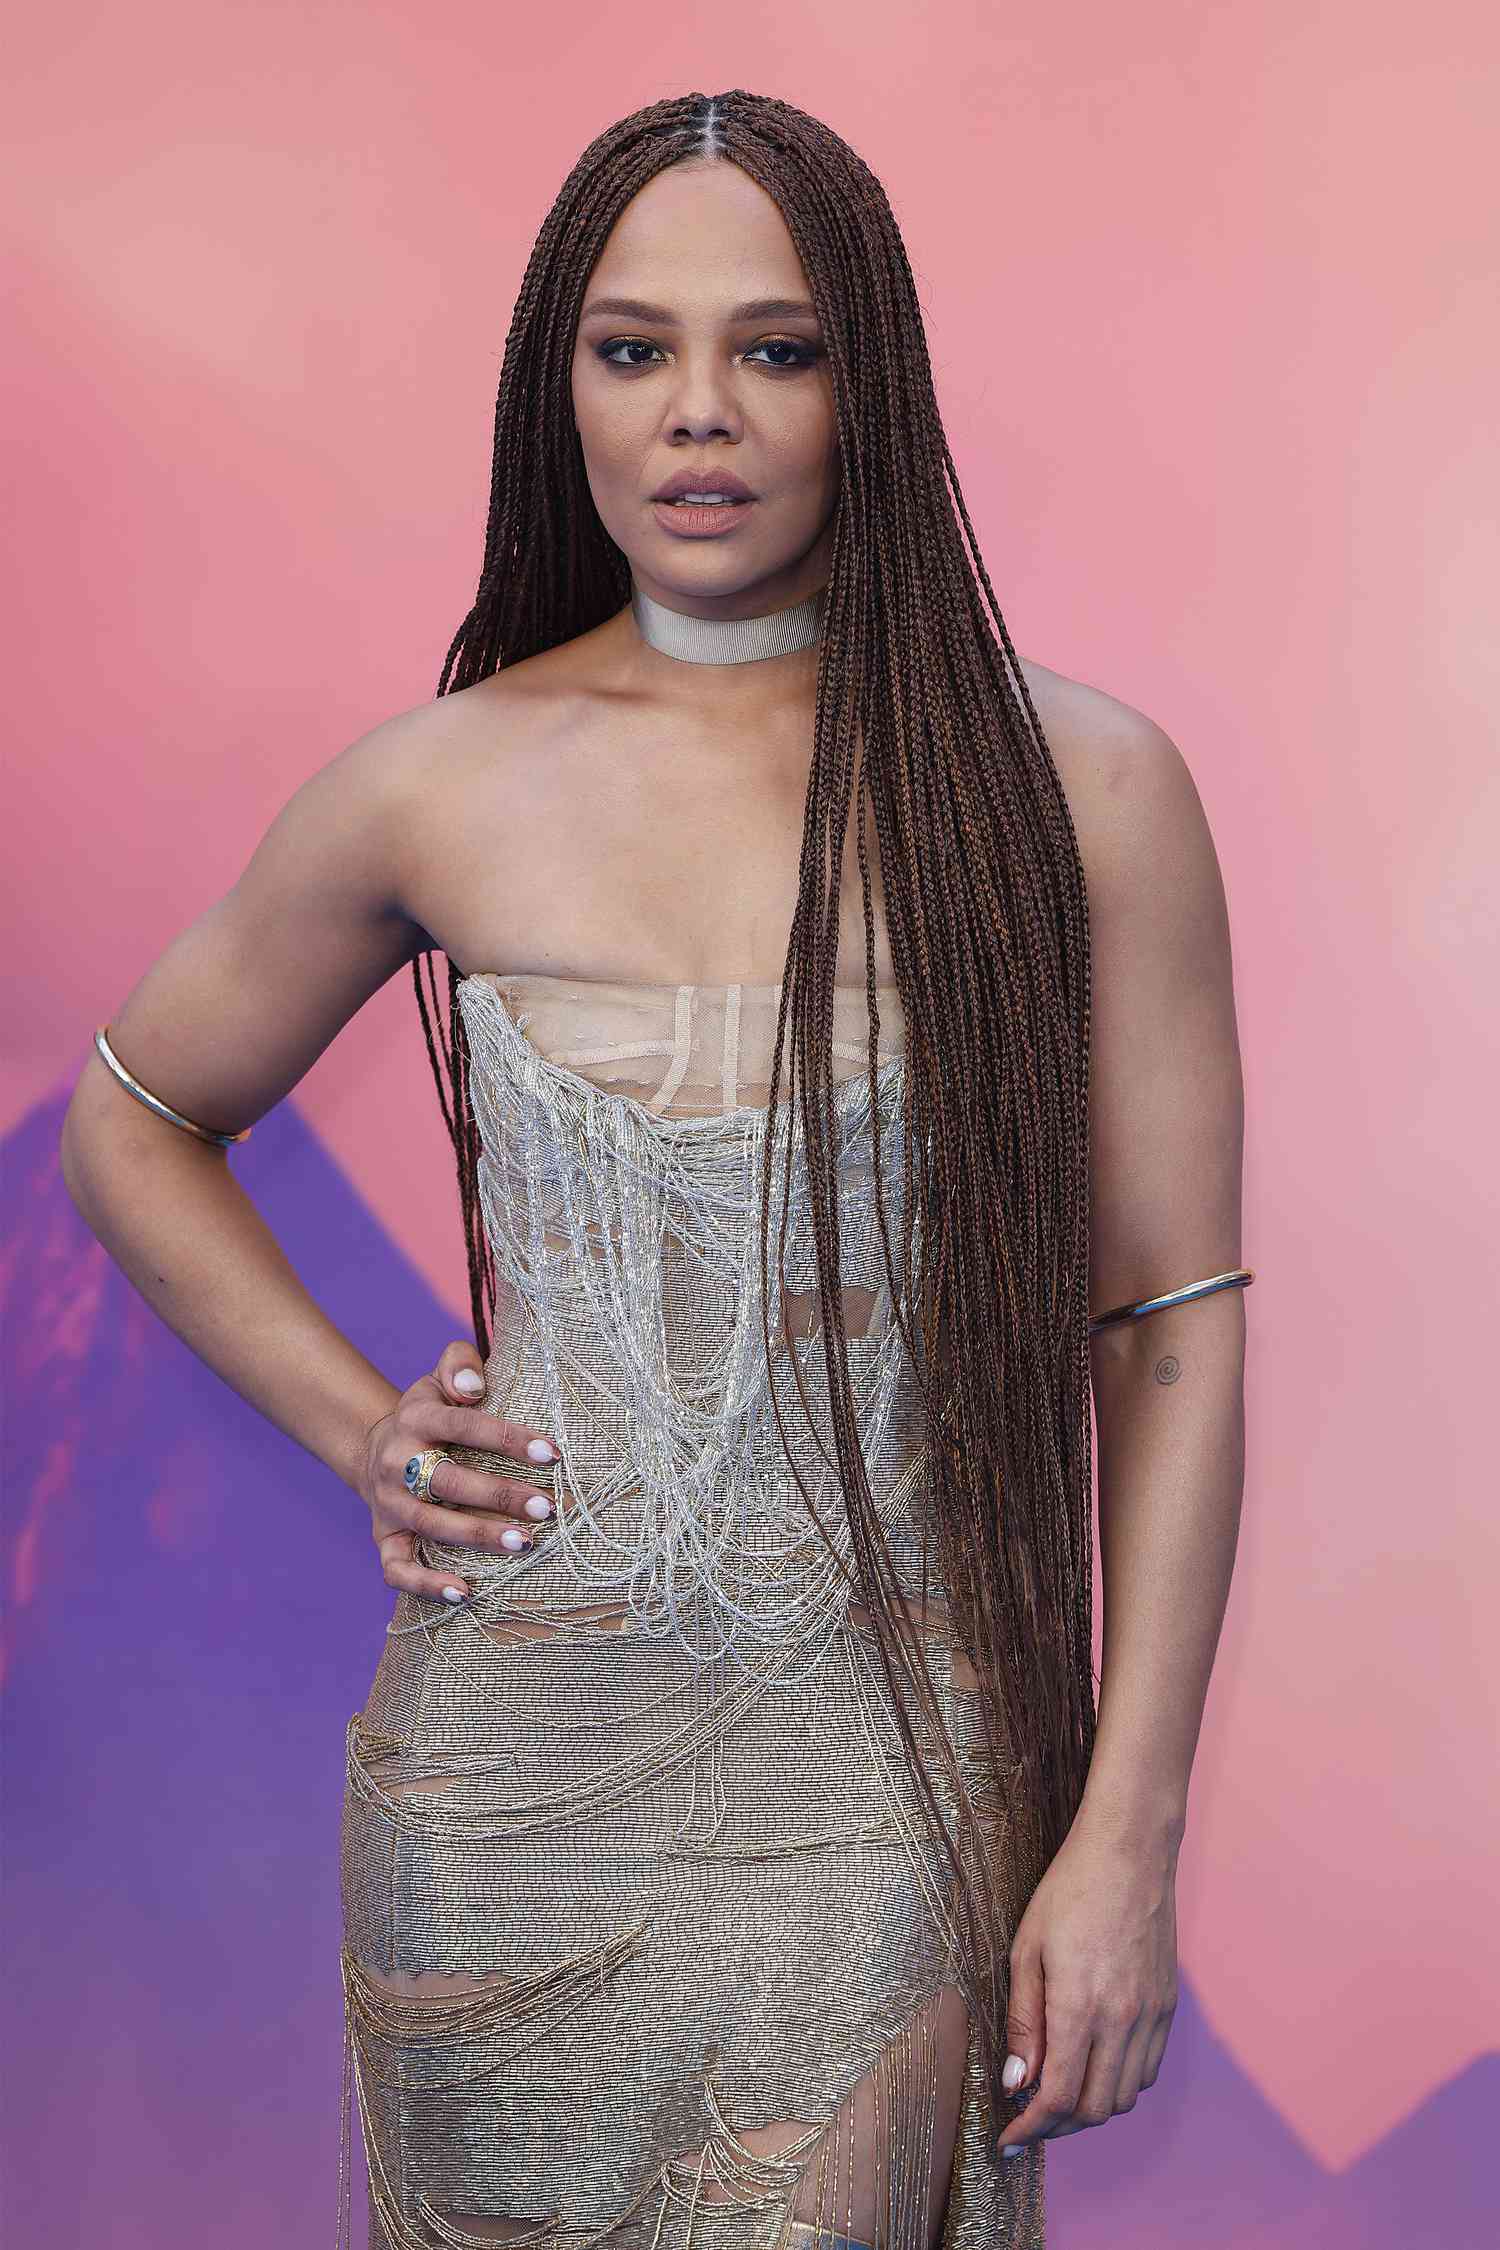 Actor Tessa Thompson with long box braids parted down the middle